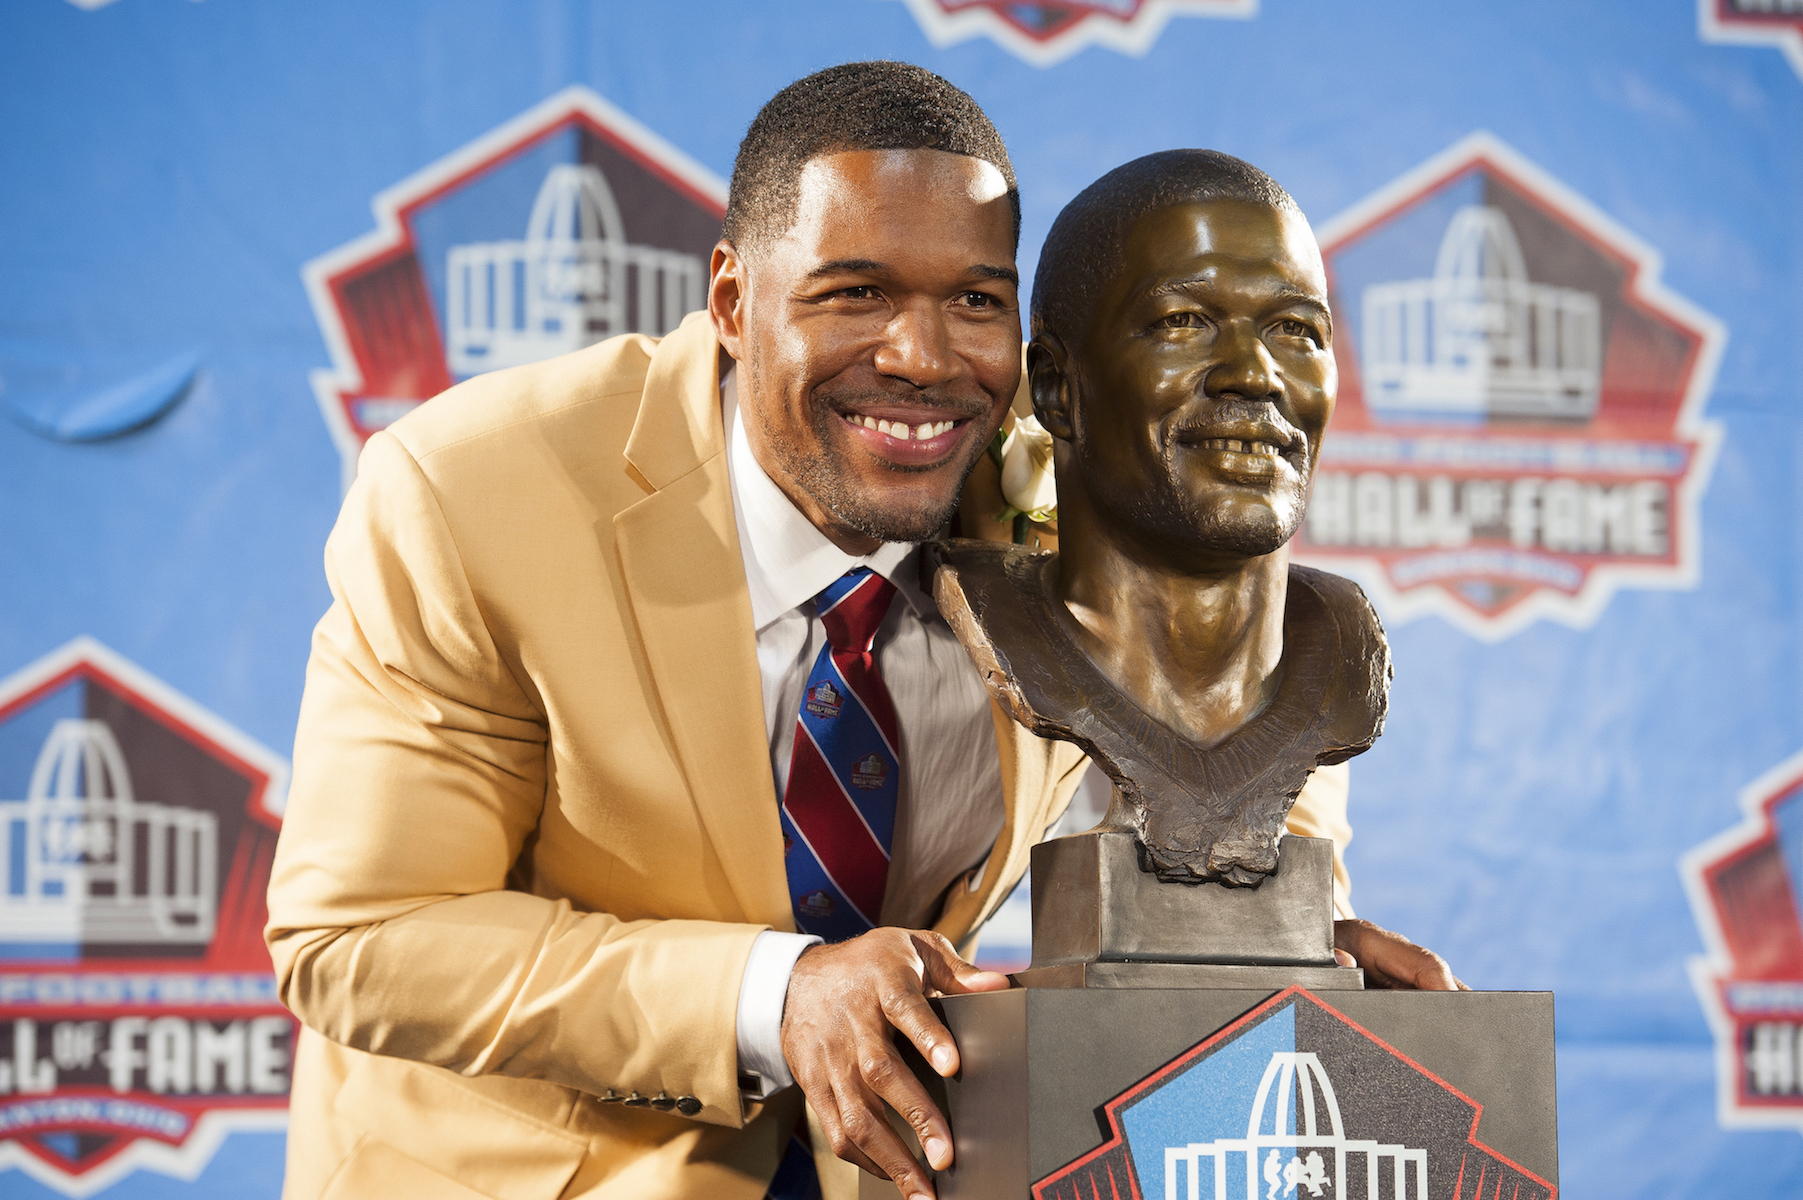 Whether you know him from the NFL or television, Michael Strahan is famous for the gap in his teeth.